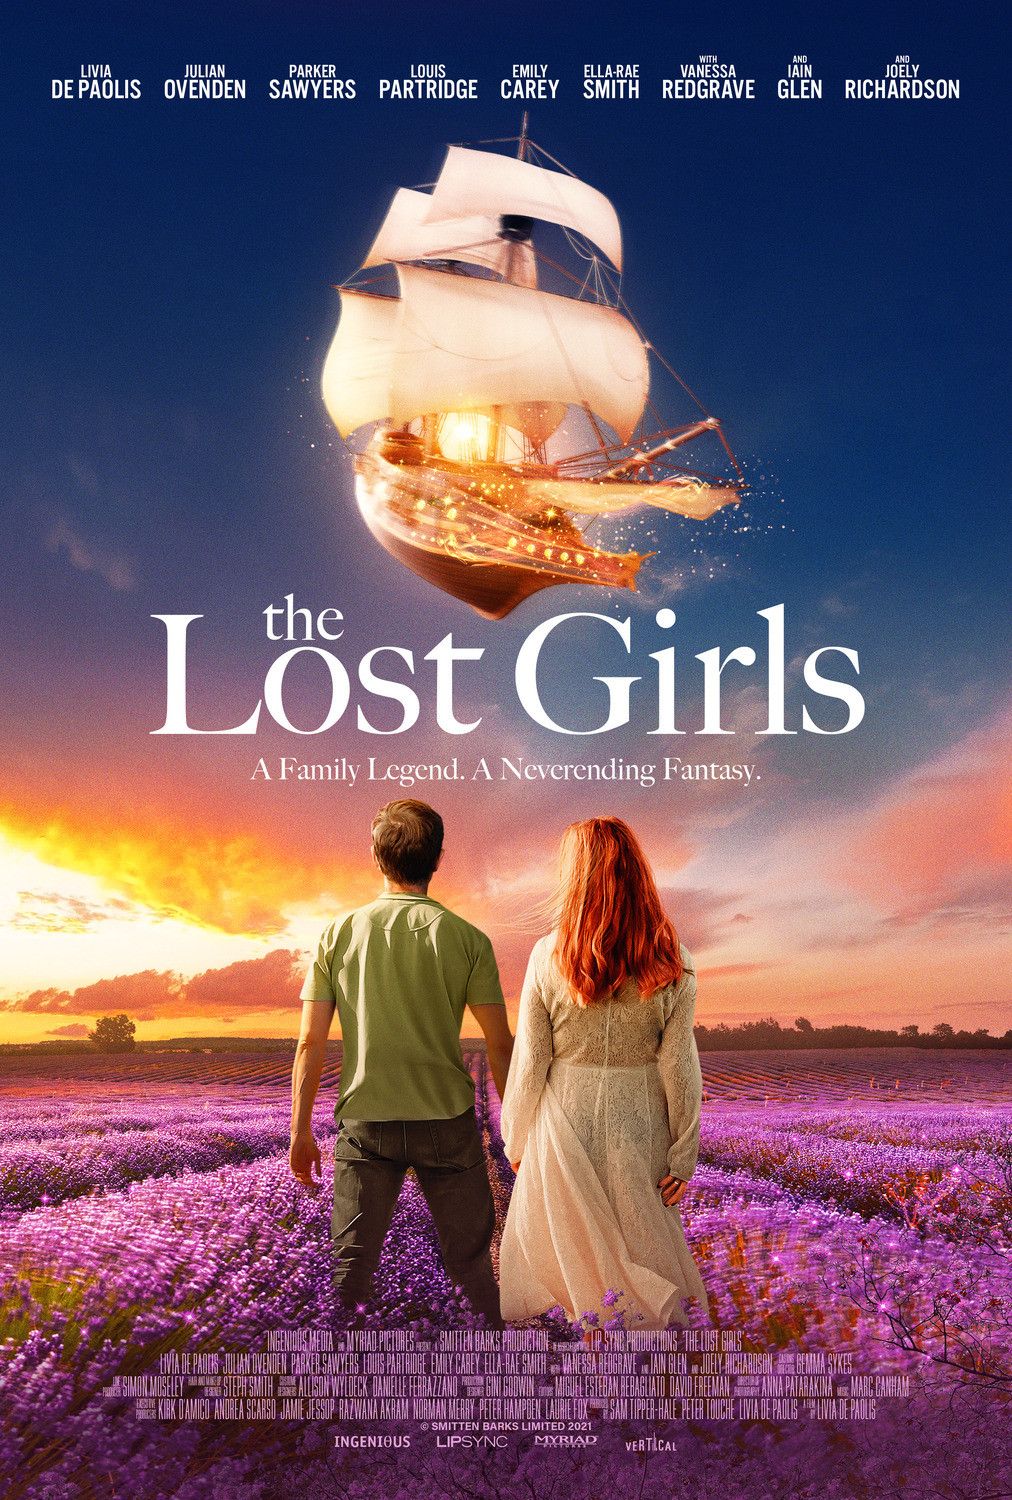 The Lost Girls Reviews - Metacritic